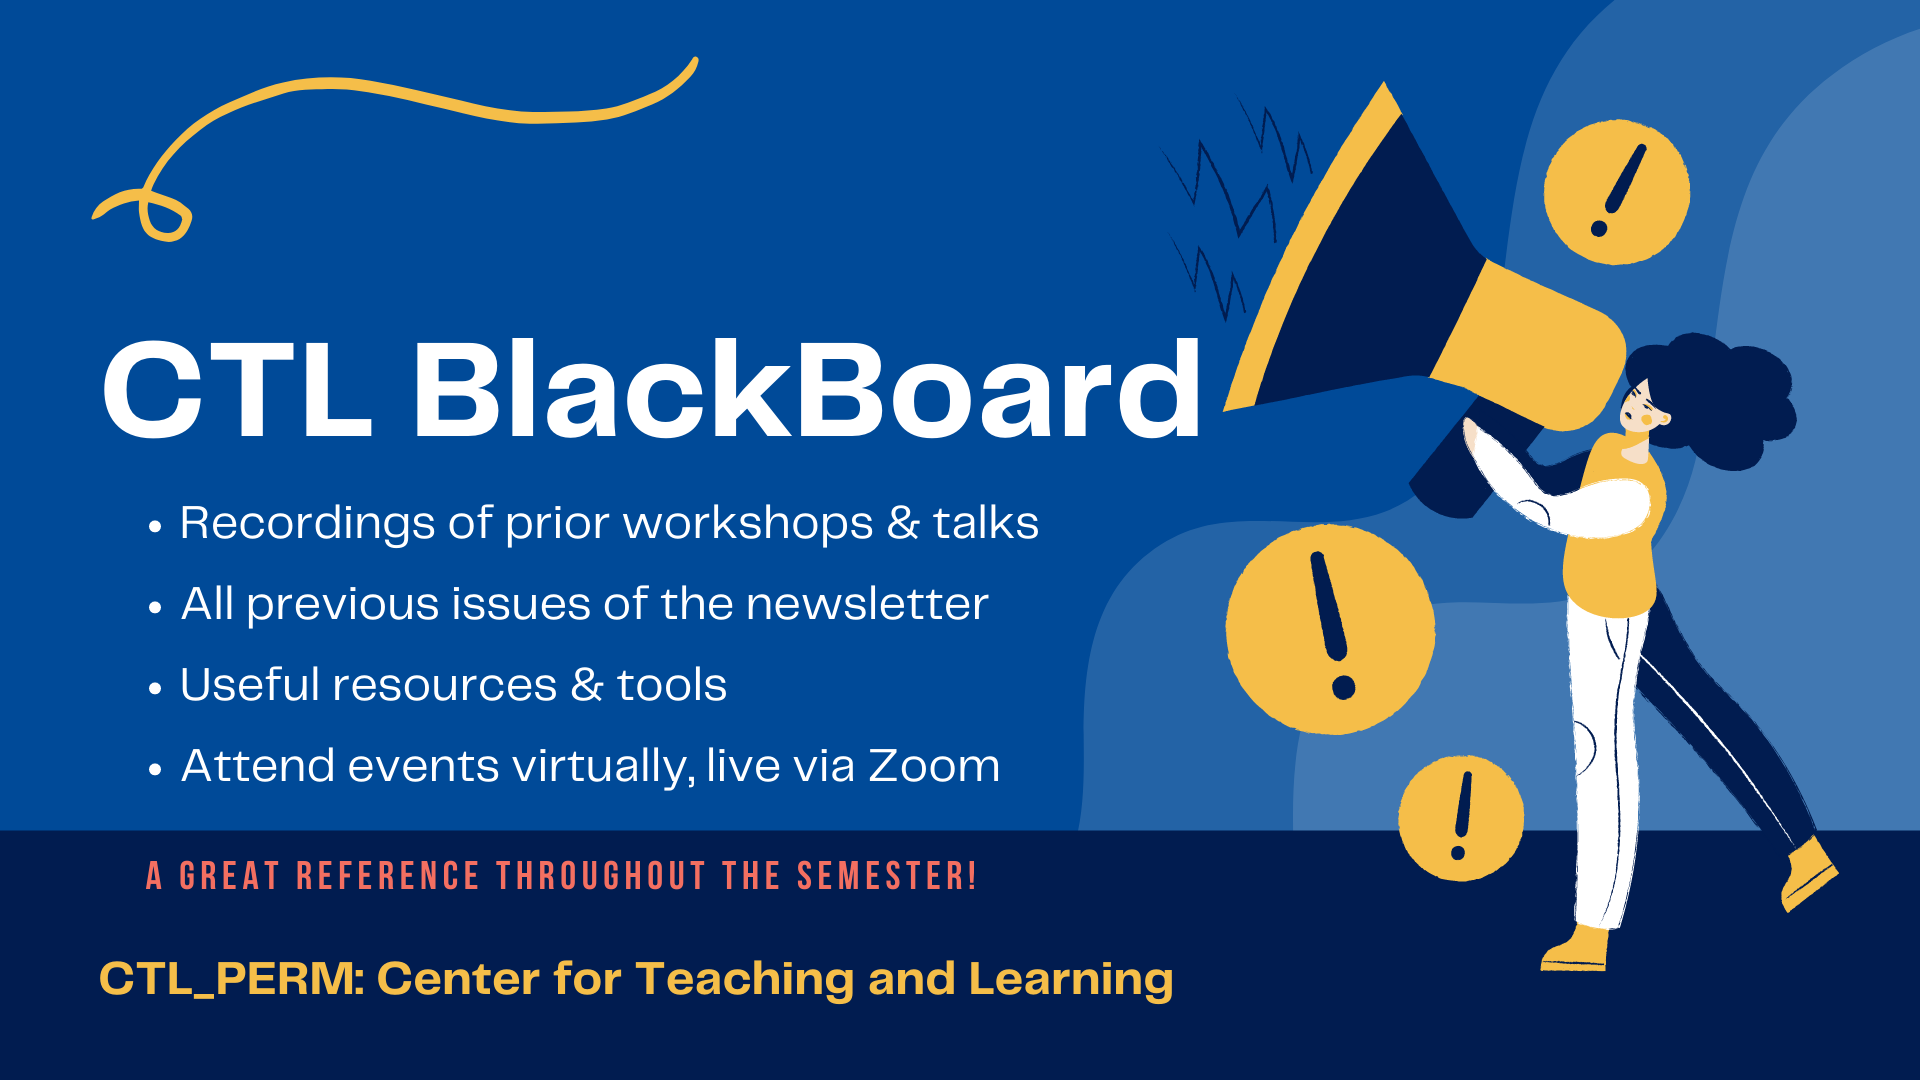 CTL BlackBoard Page - a great resource